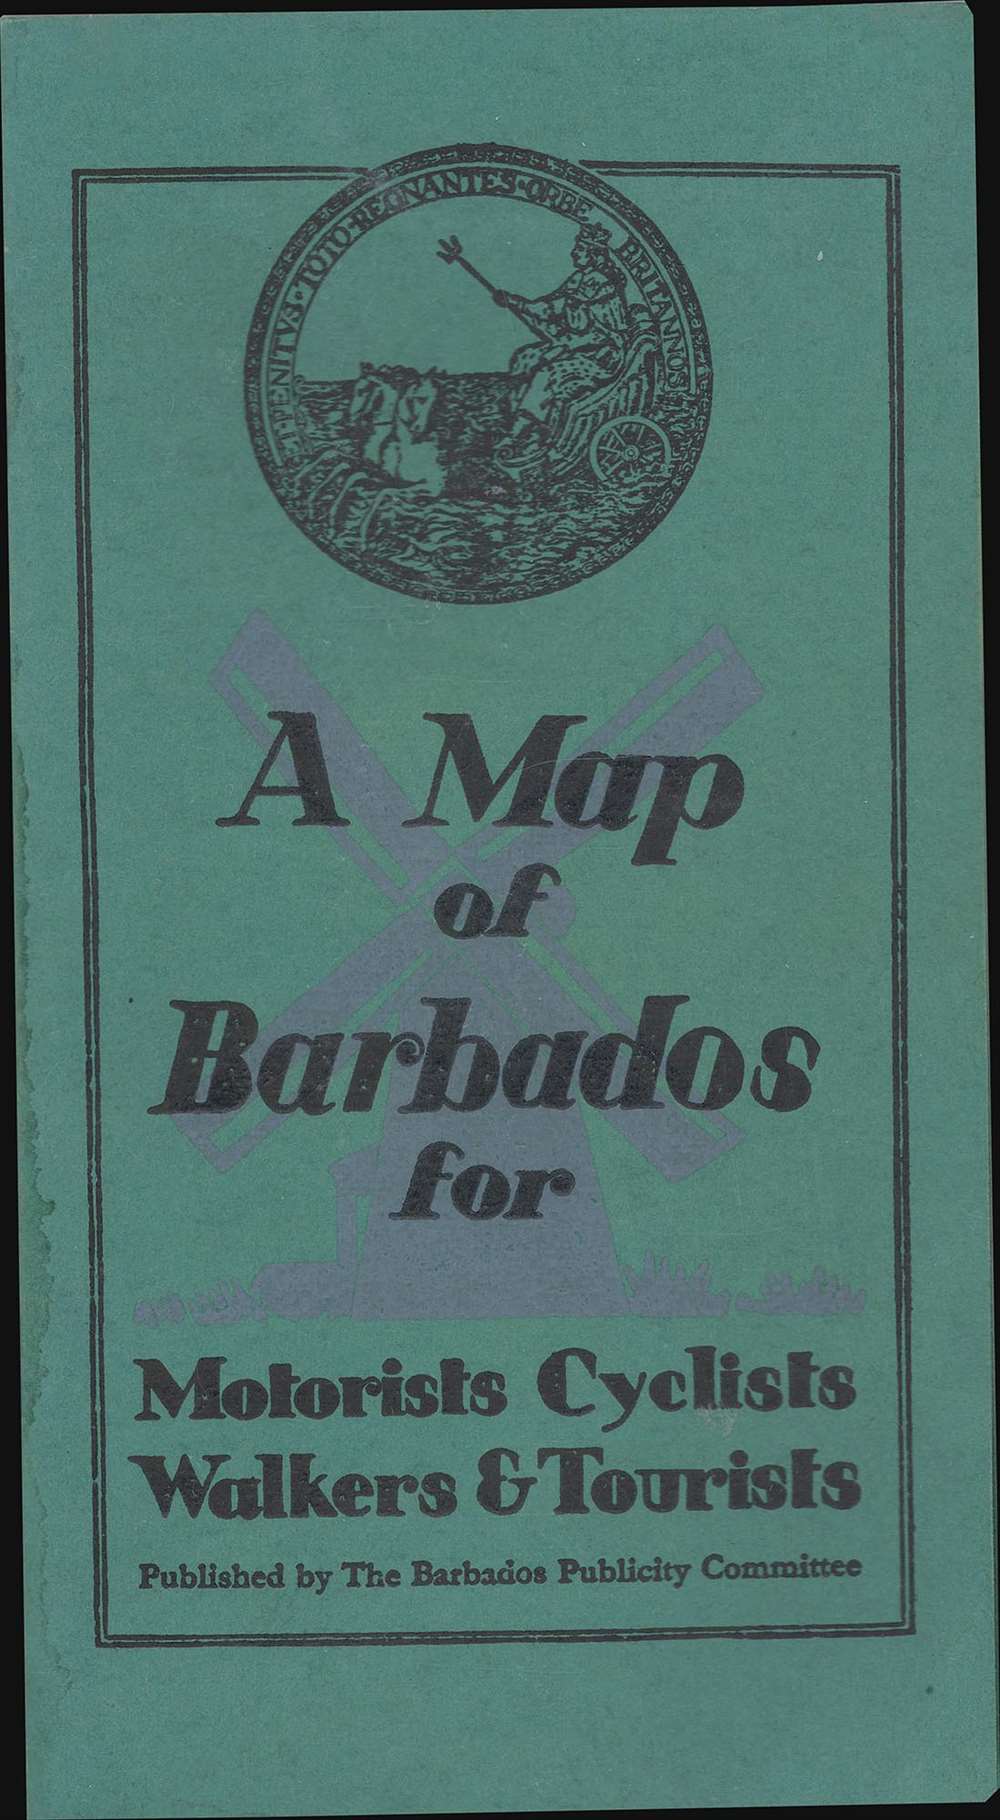 Road Map of Barbados. - Alternate View 1